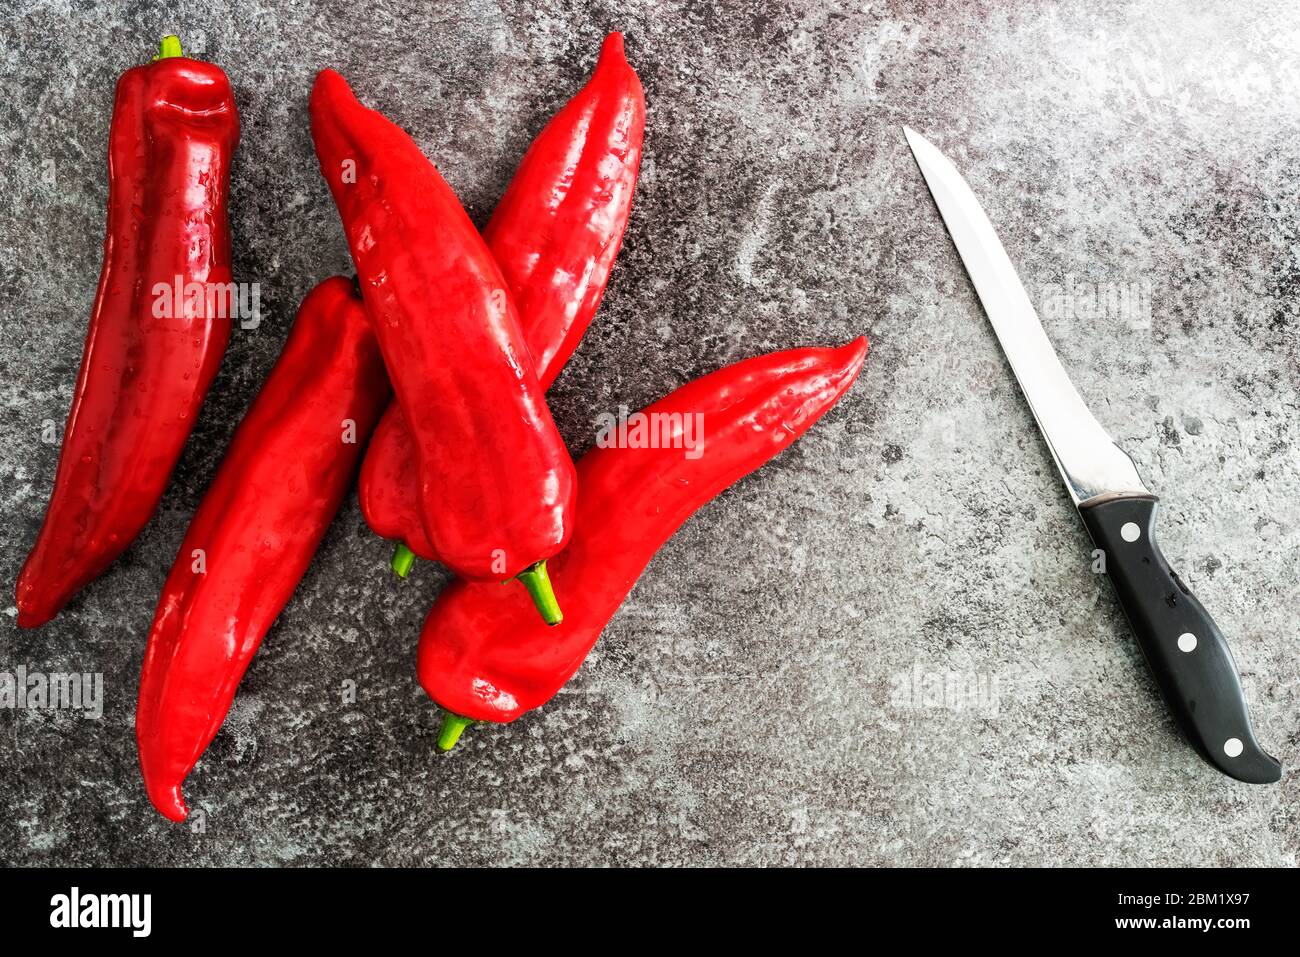 directly above view of red bell peppers and cutting knife on stone kitchen counter Stock Photo